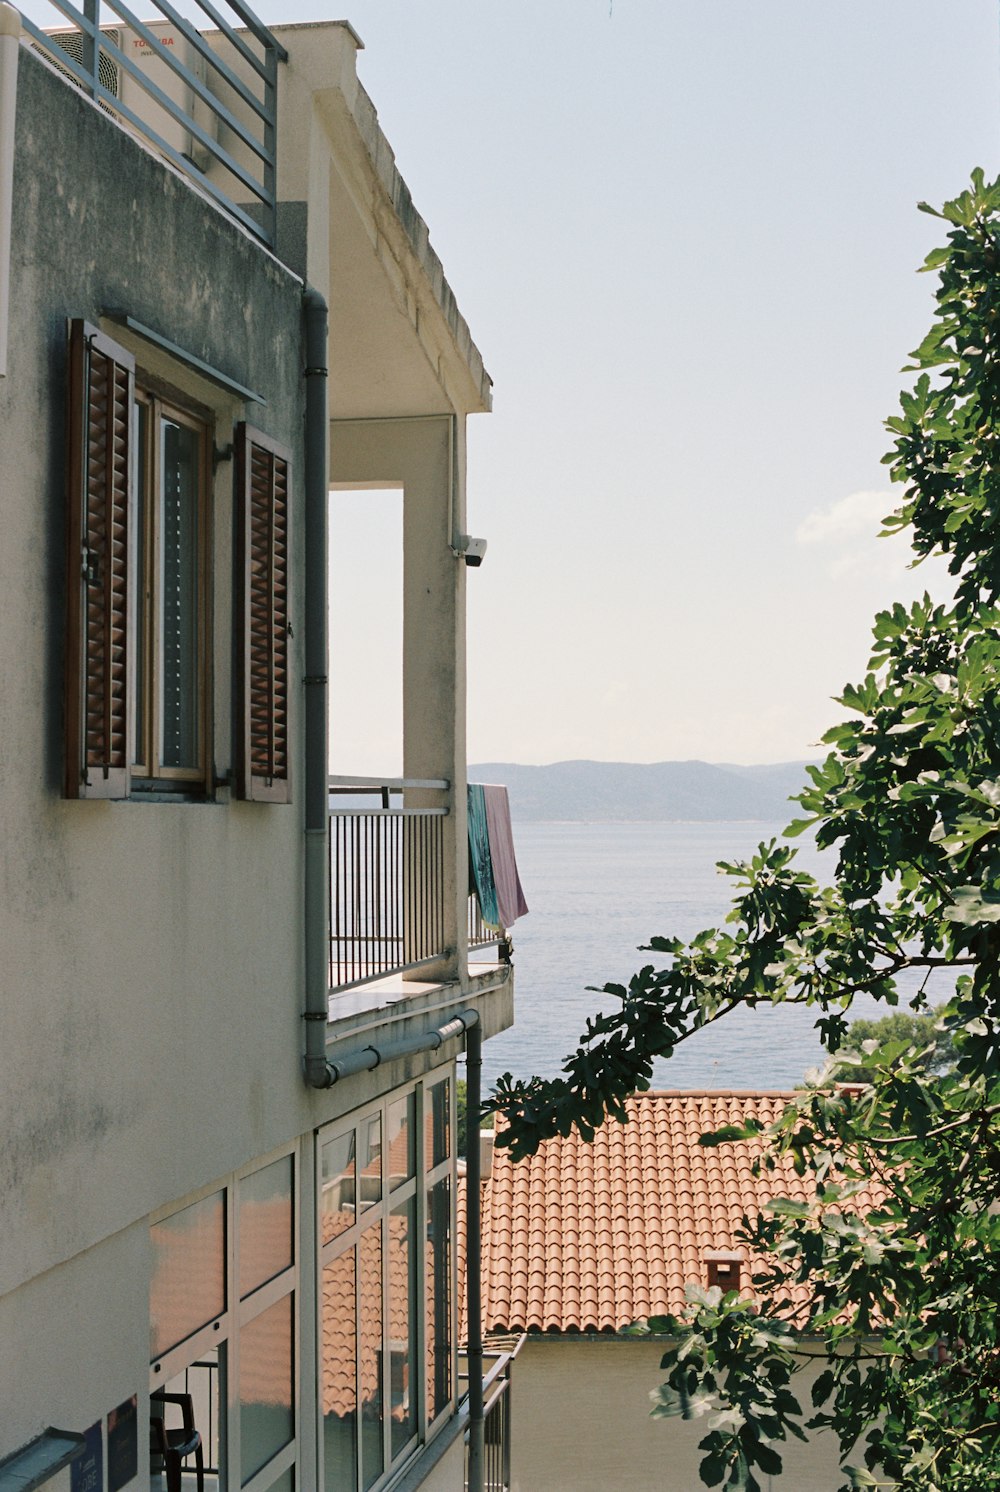 a balcony with a view of a body of water